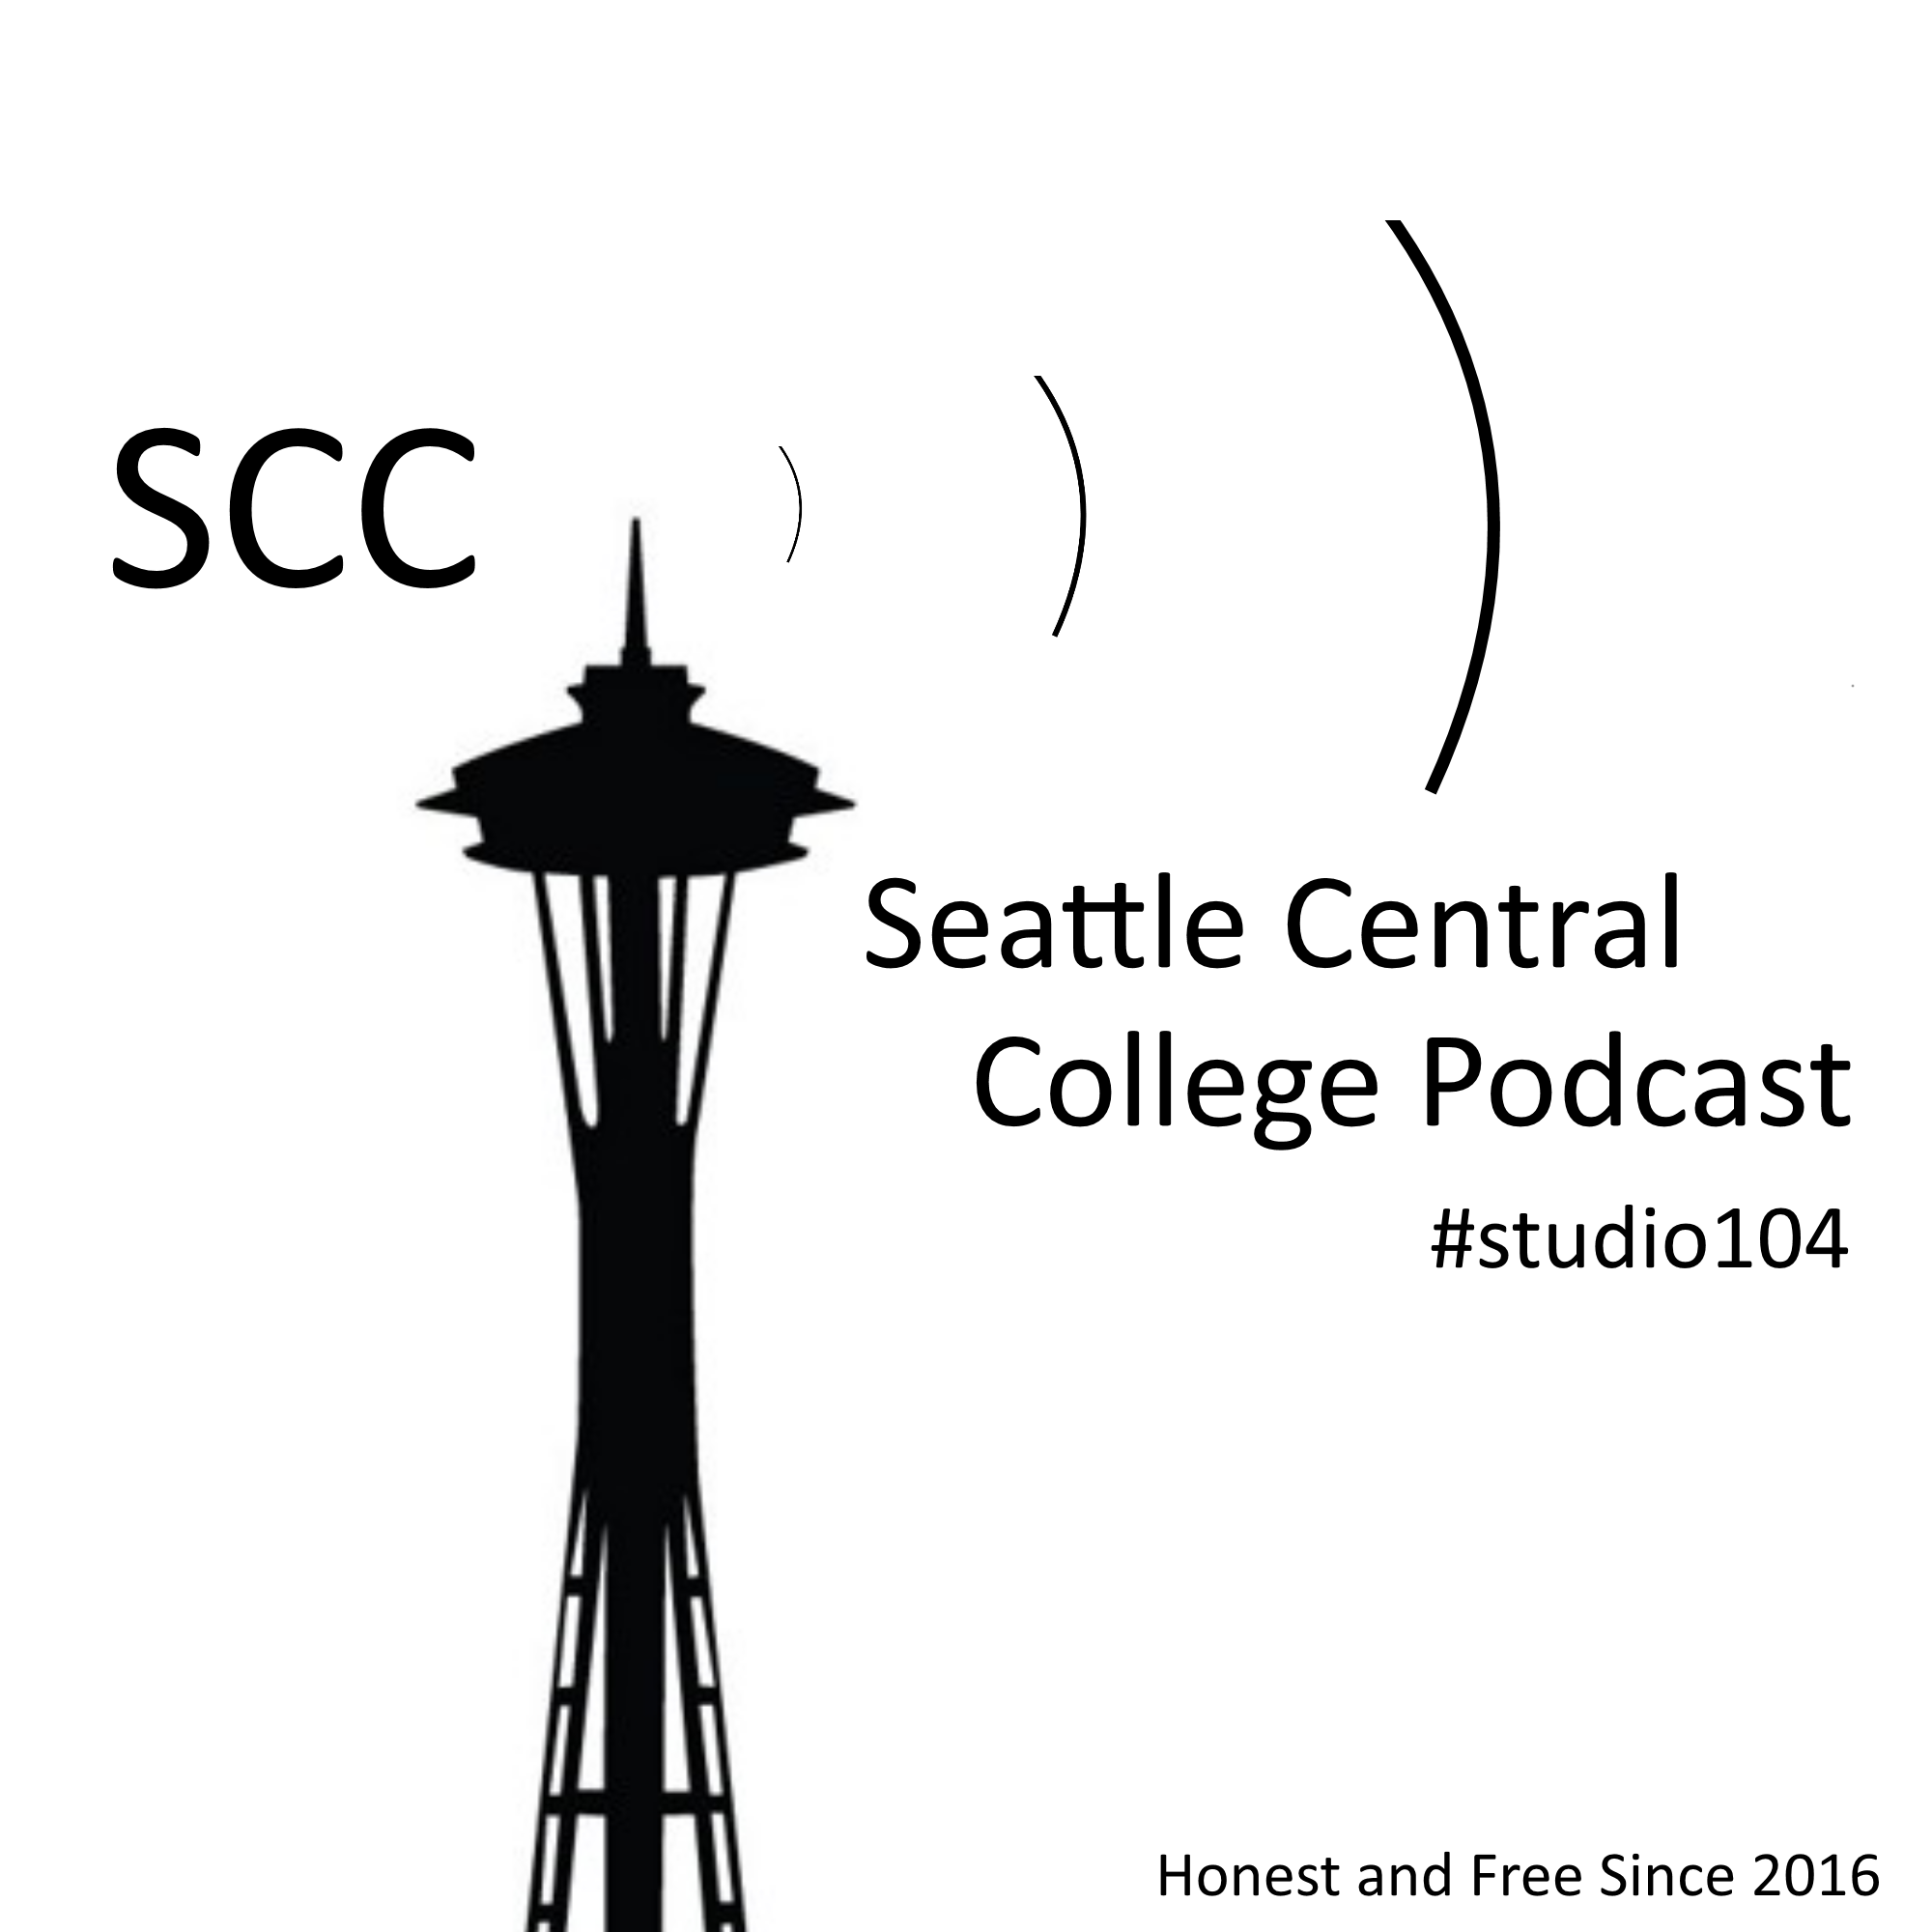 Seattle Central College Podcast